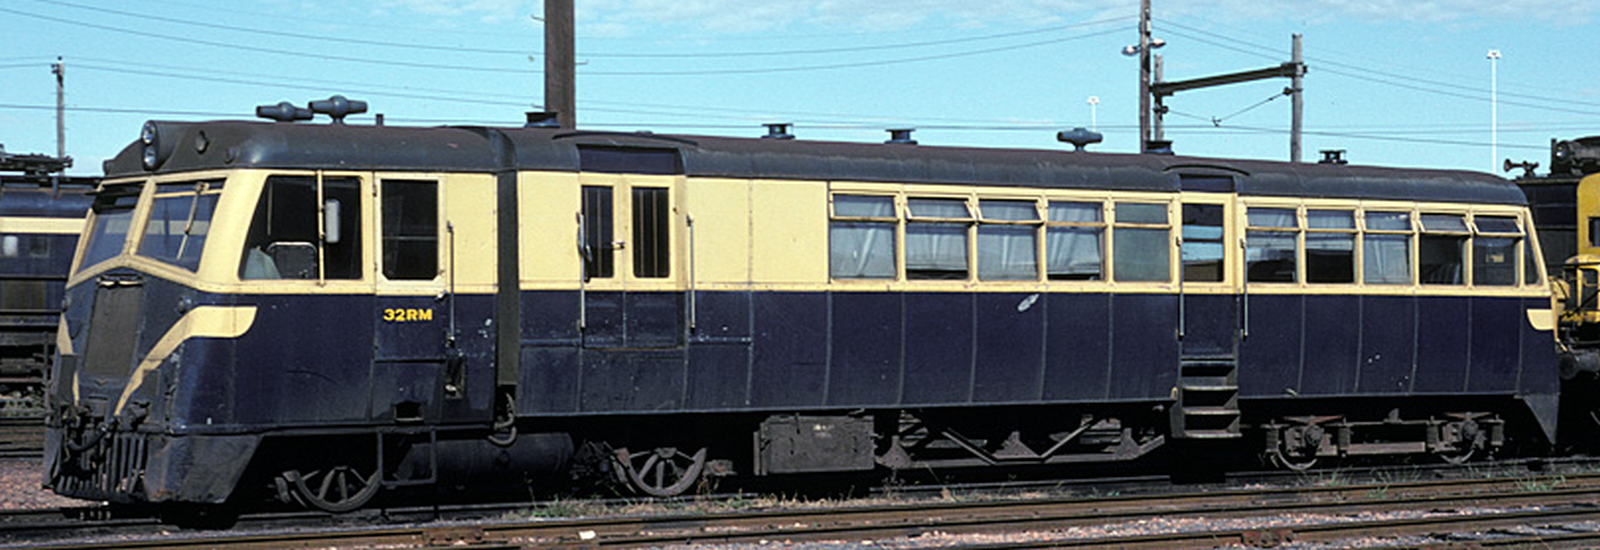 RM 32 (Walker 153 hp) in 1981 at South Dynon depot